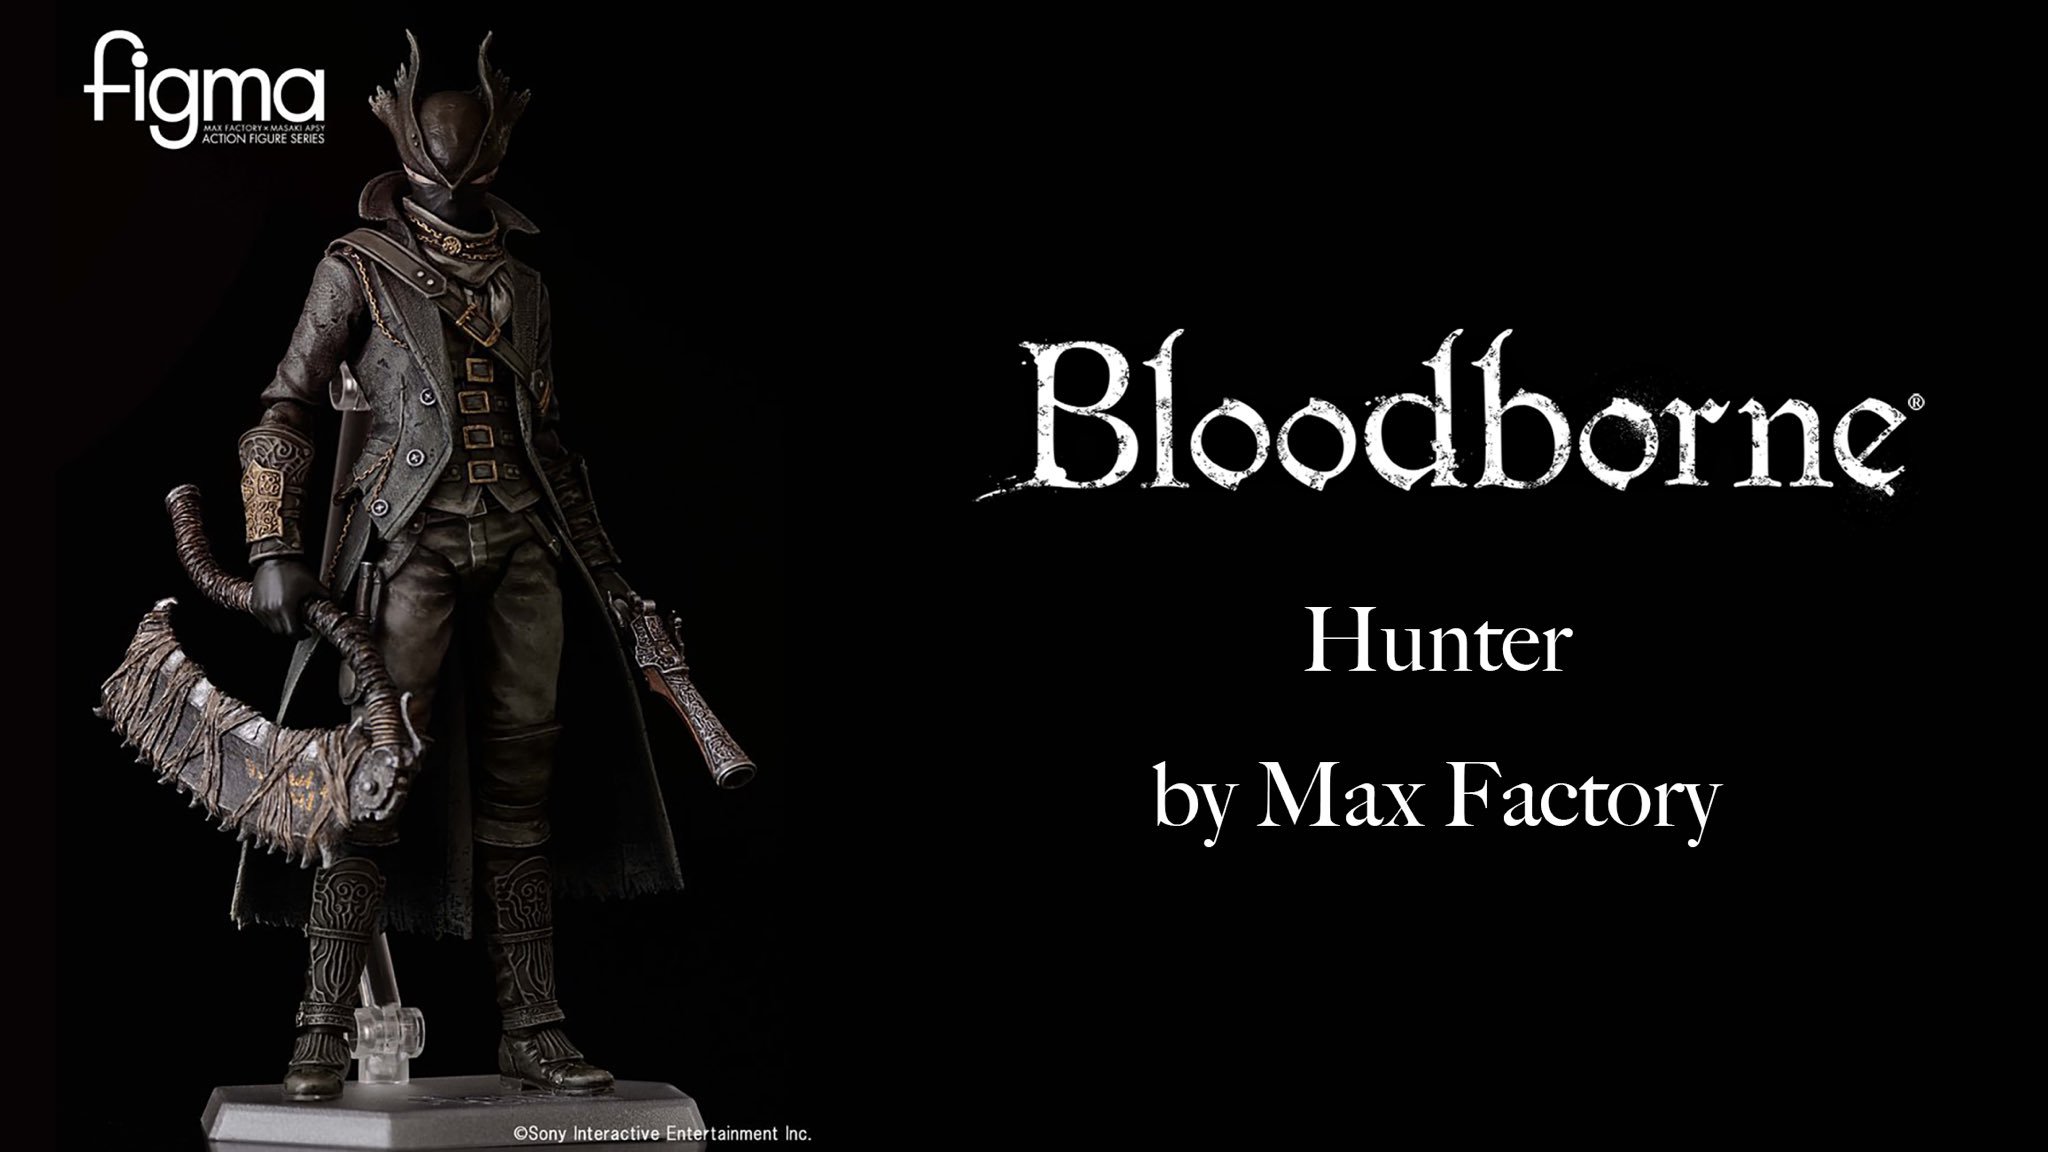 Bloodborne Official 狩人のfigmaです 可動式のアクションフィギュアになります Hunter Will Be Joining The Figma Series T Co Zgrlfko5xc T Co Ted2ox5vdf Twitter